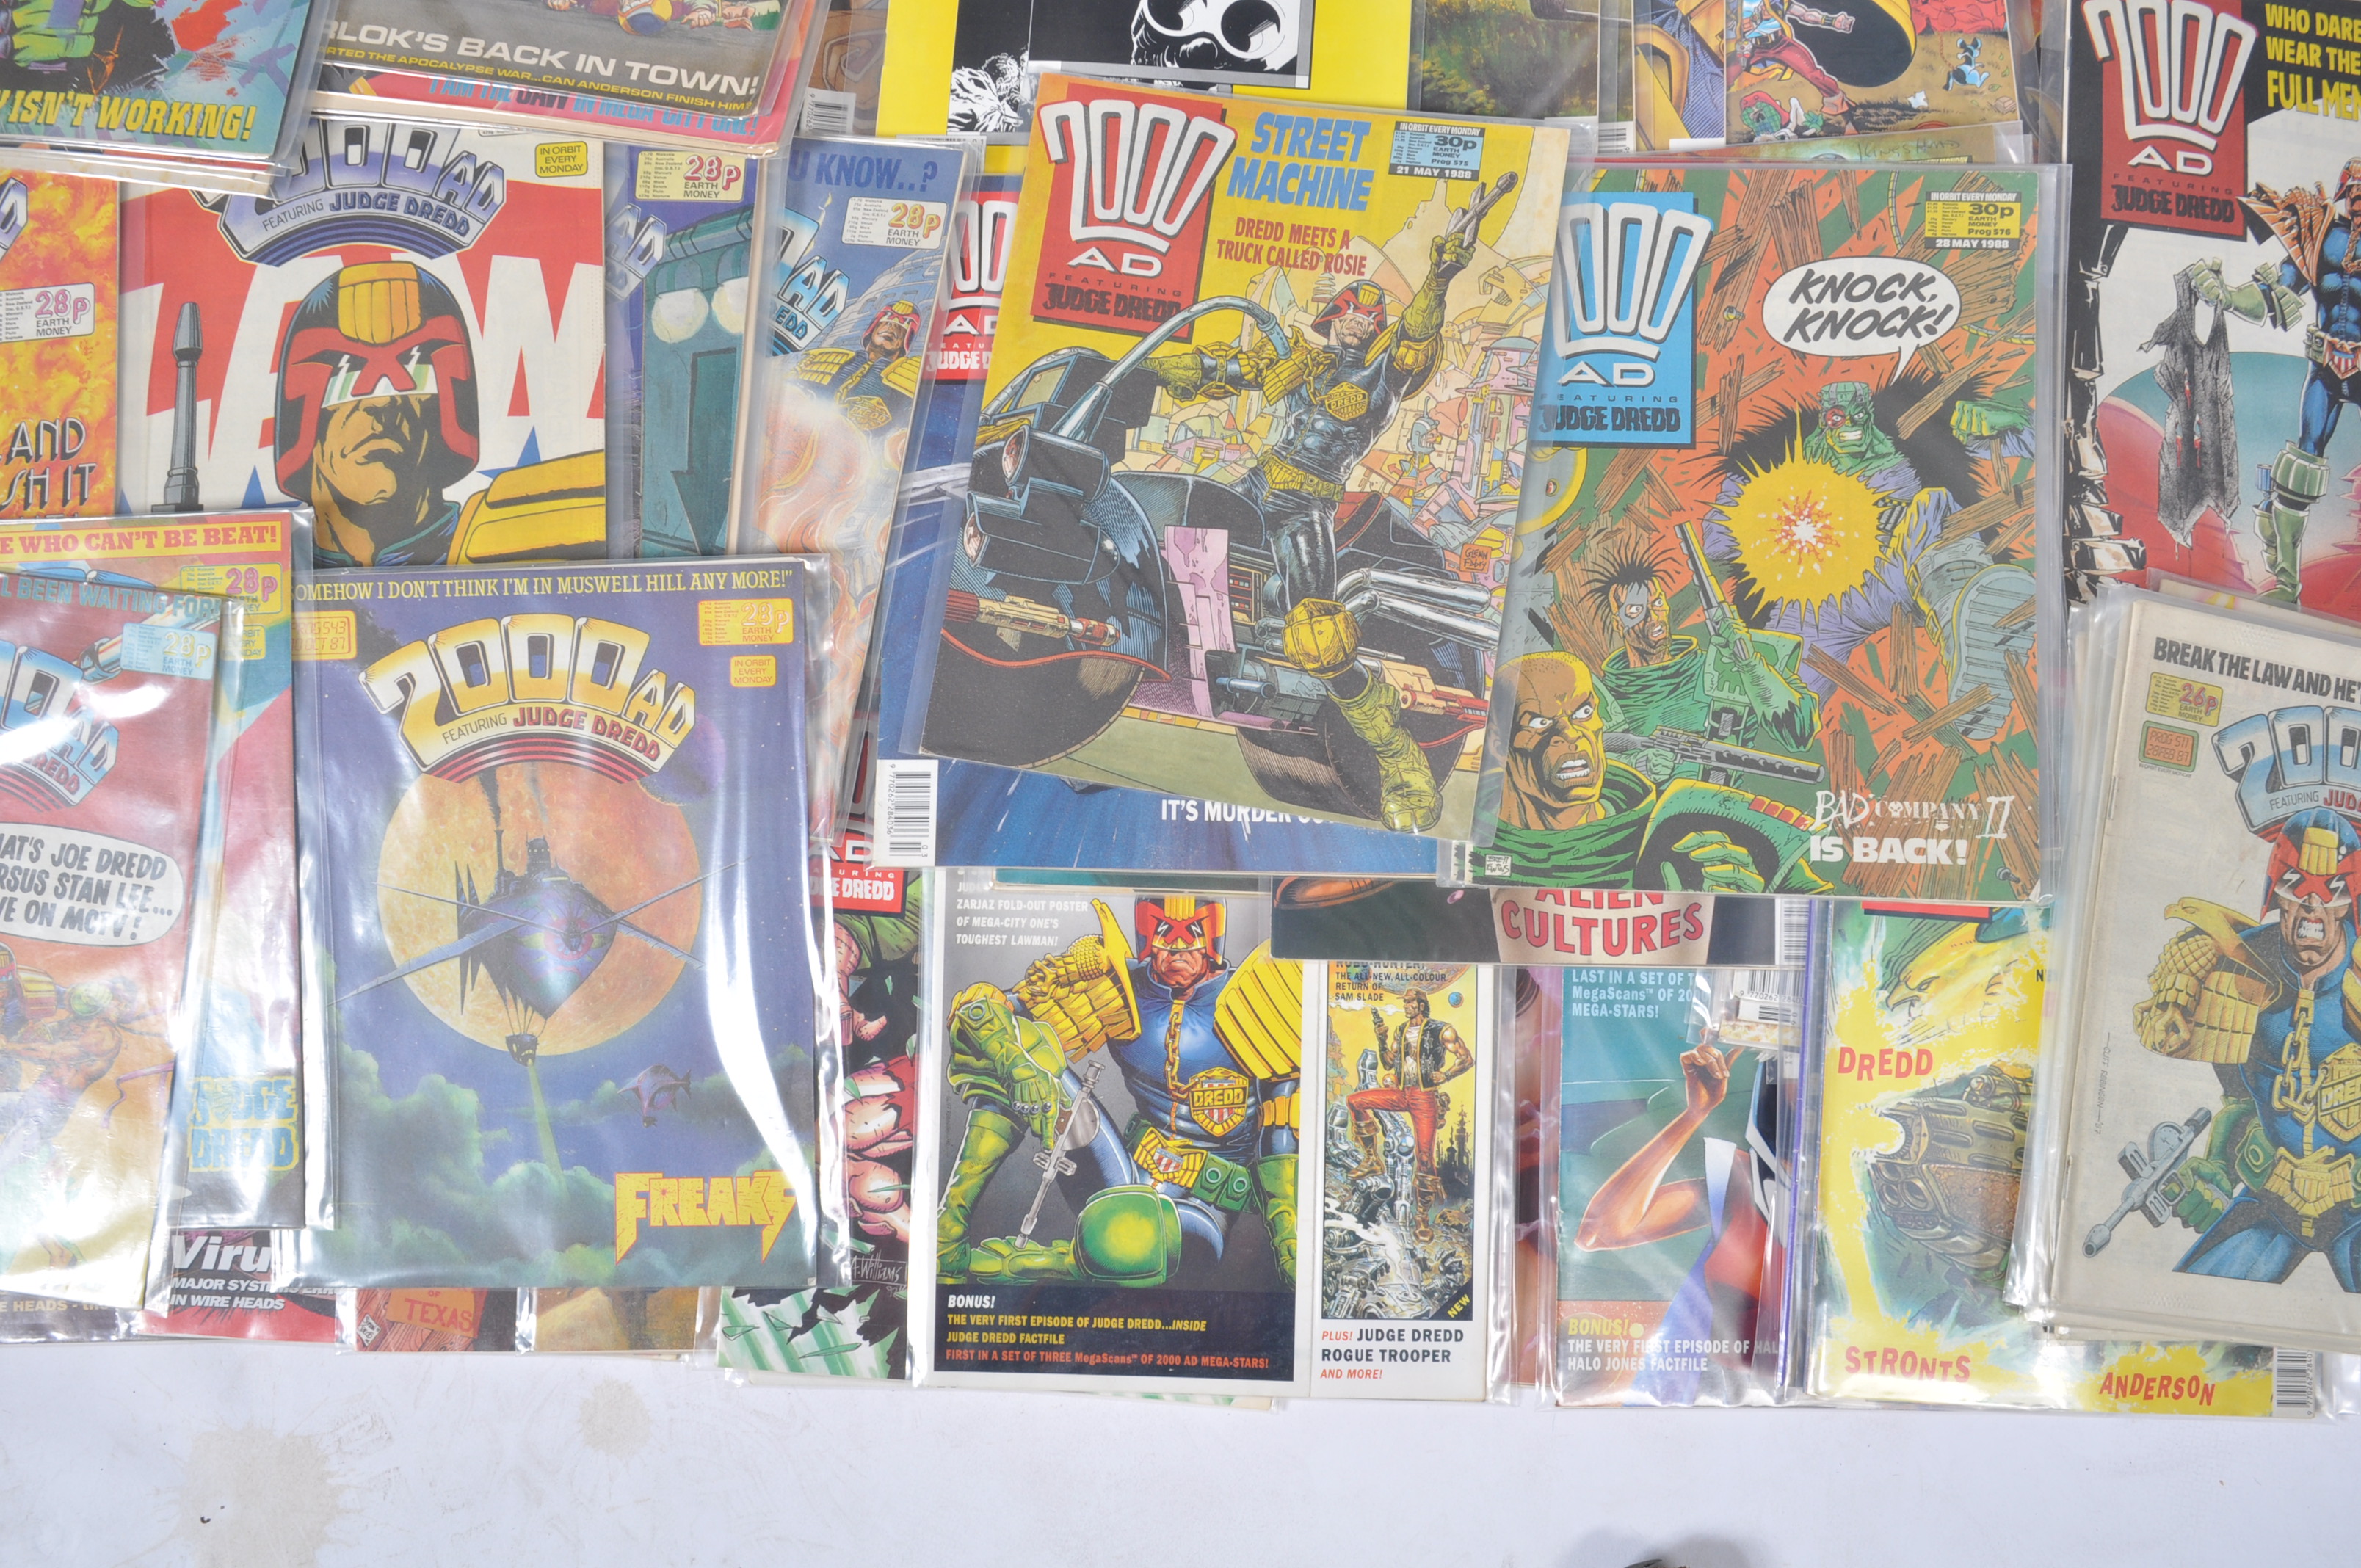 COMIC BOOKS - 2000AD - LARGE COLLECTION OF VINTAGE COMIC BOOKS - Image 5 of 17